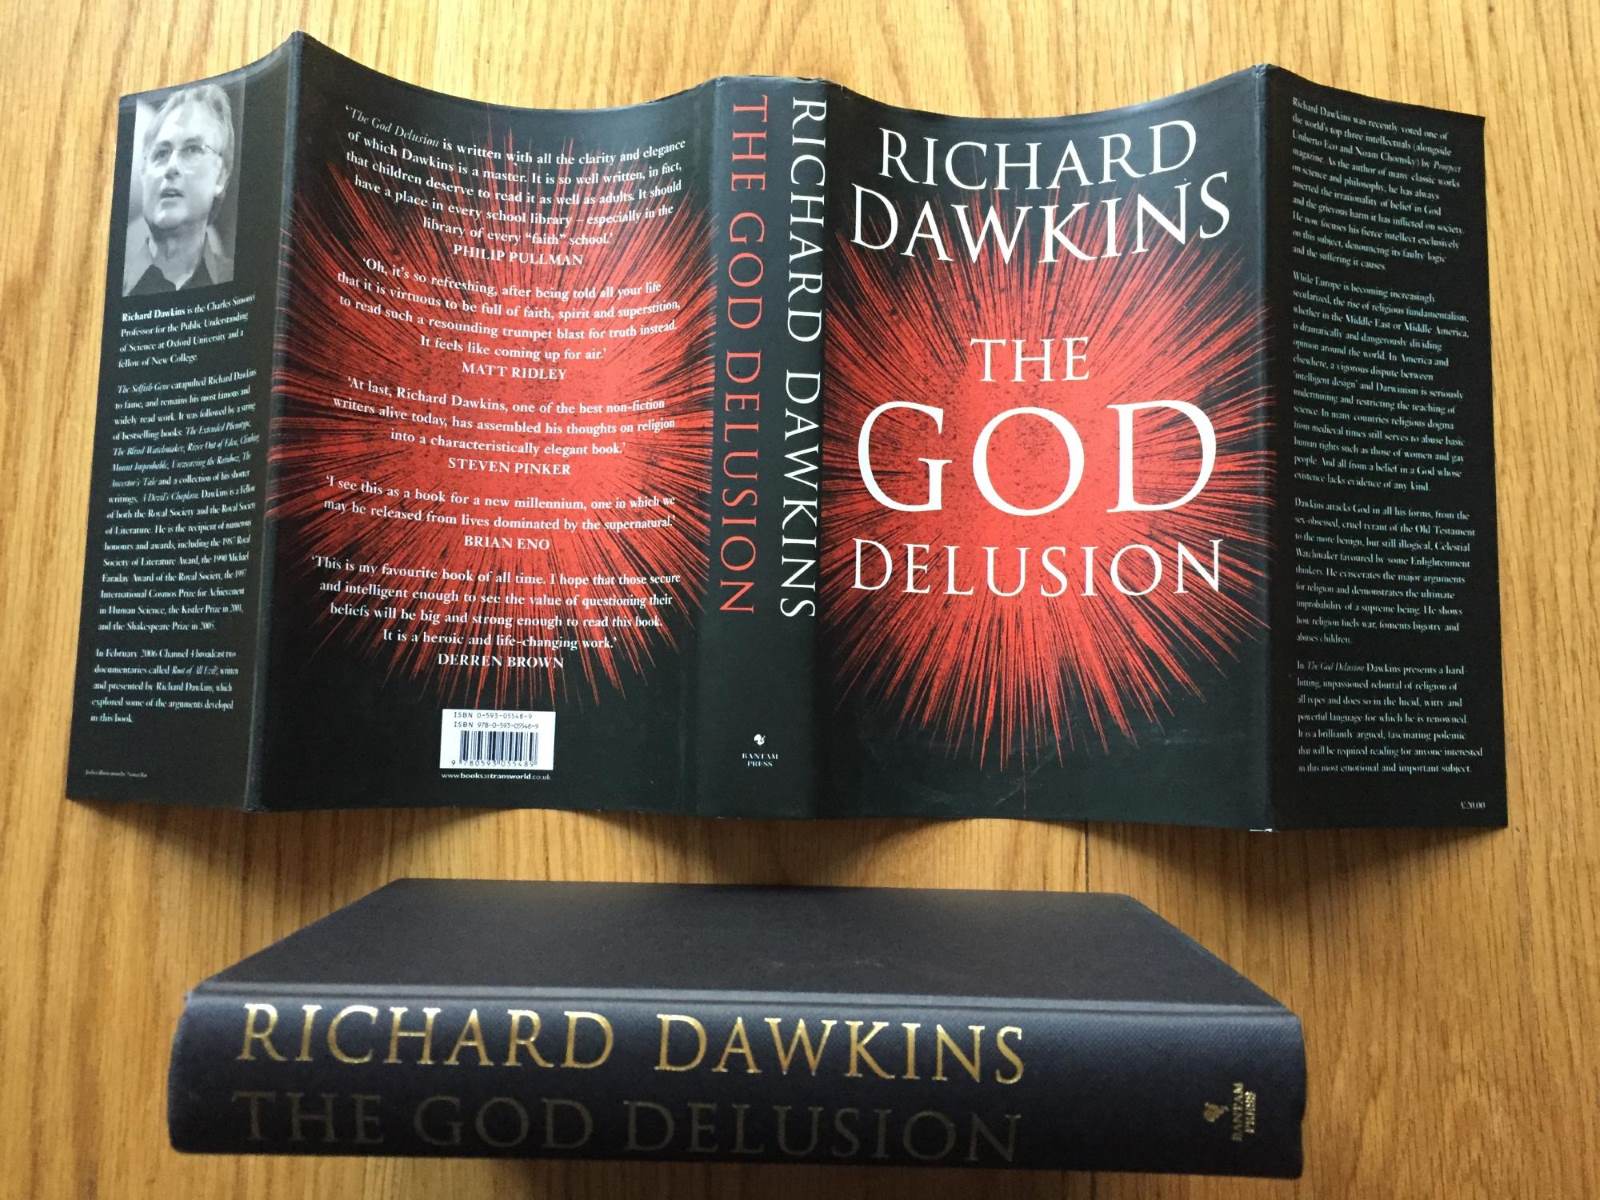 9-extraordinary-facts-about-the-god-delusion-richard-dawkins